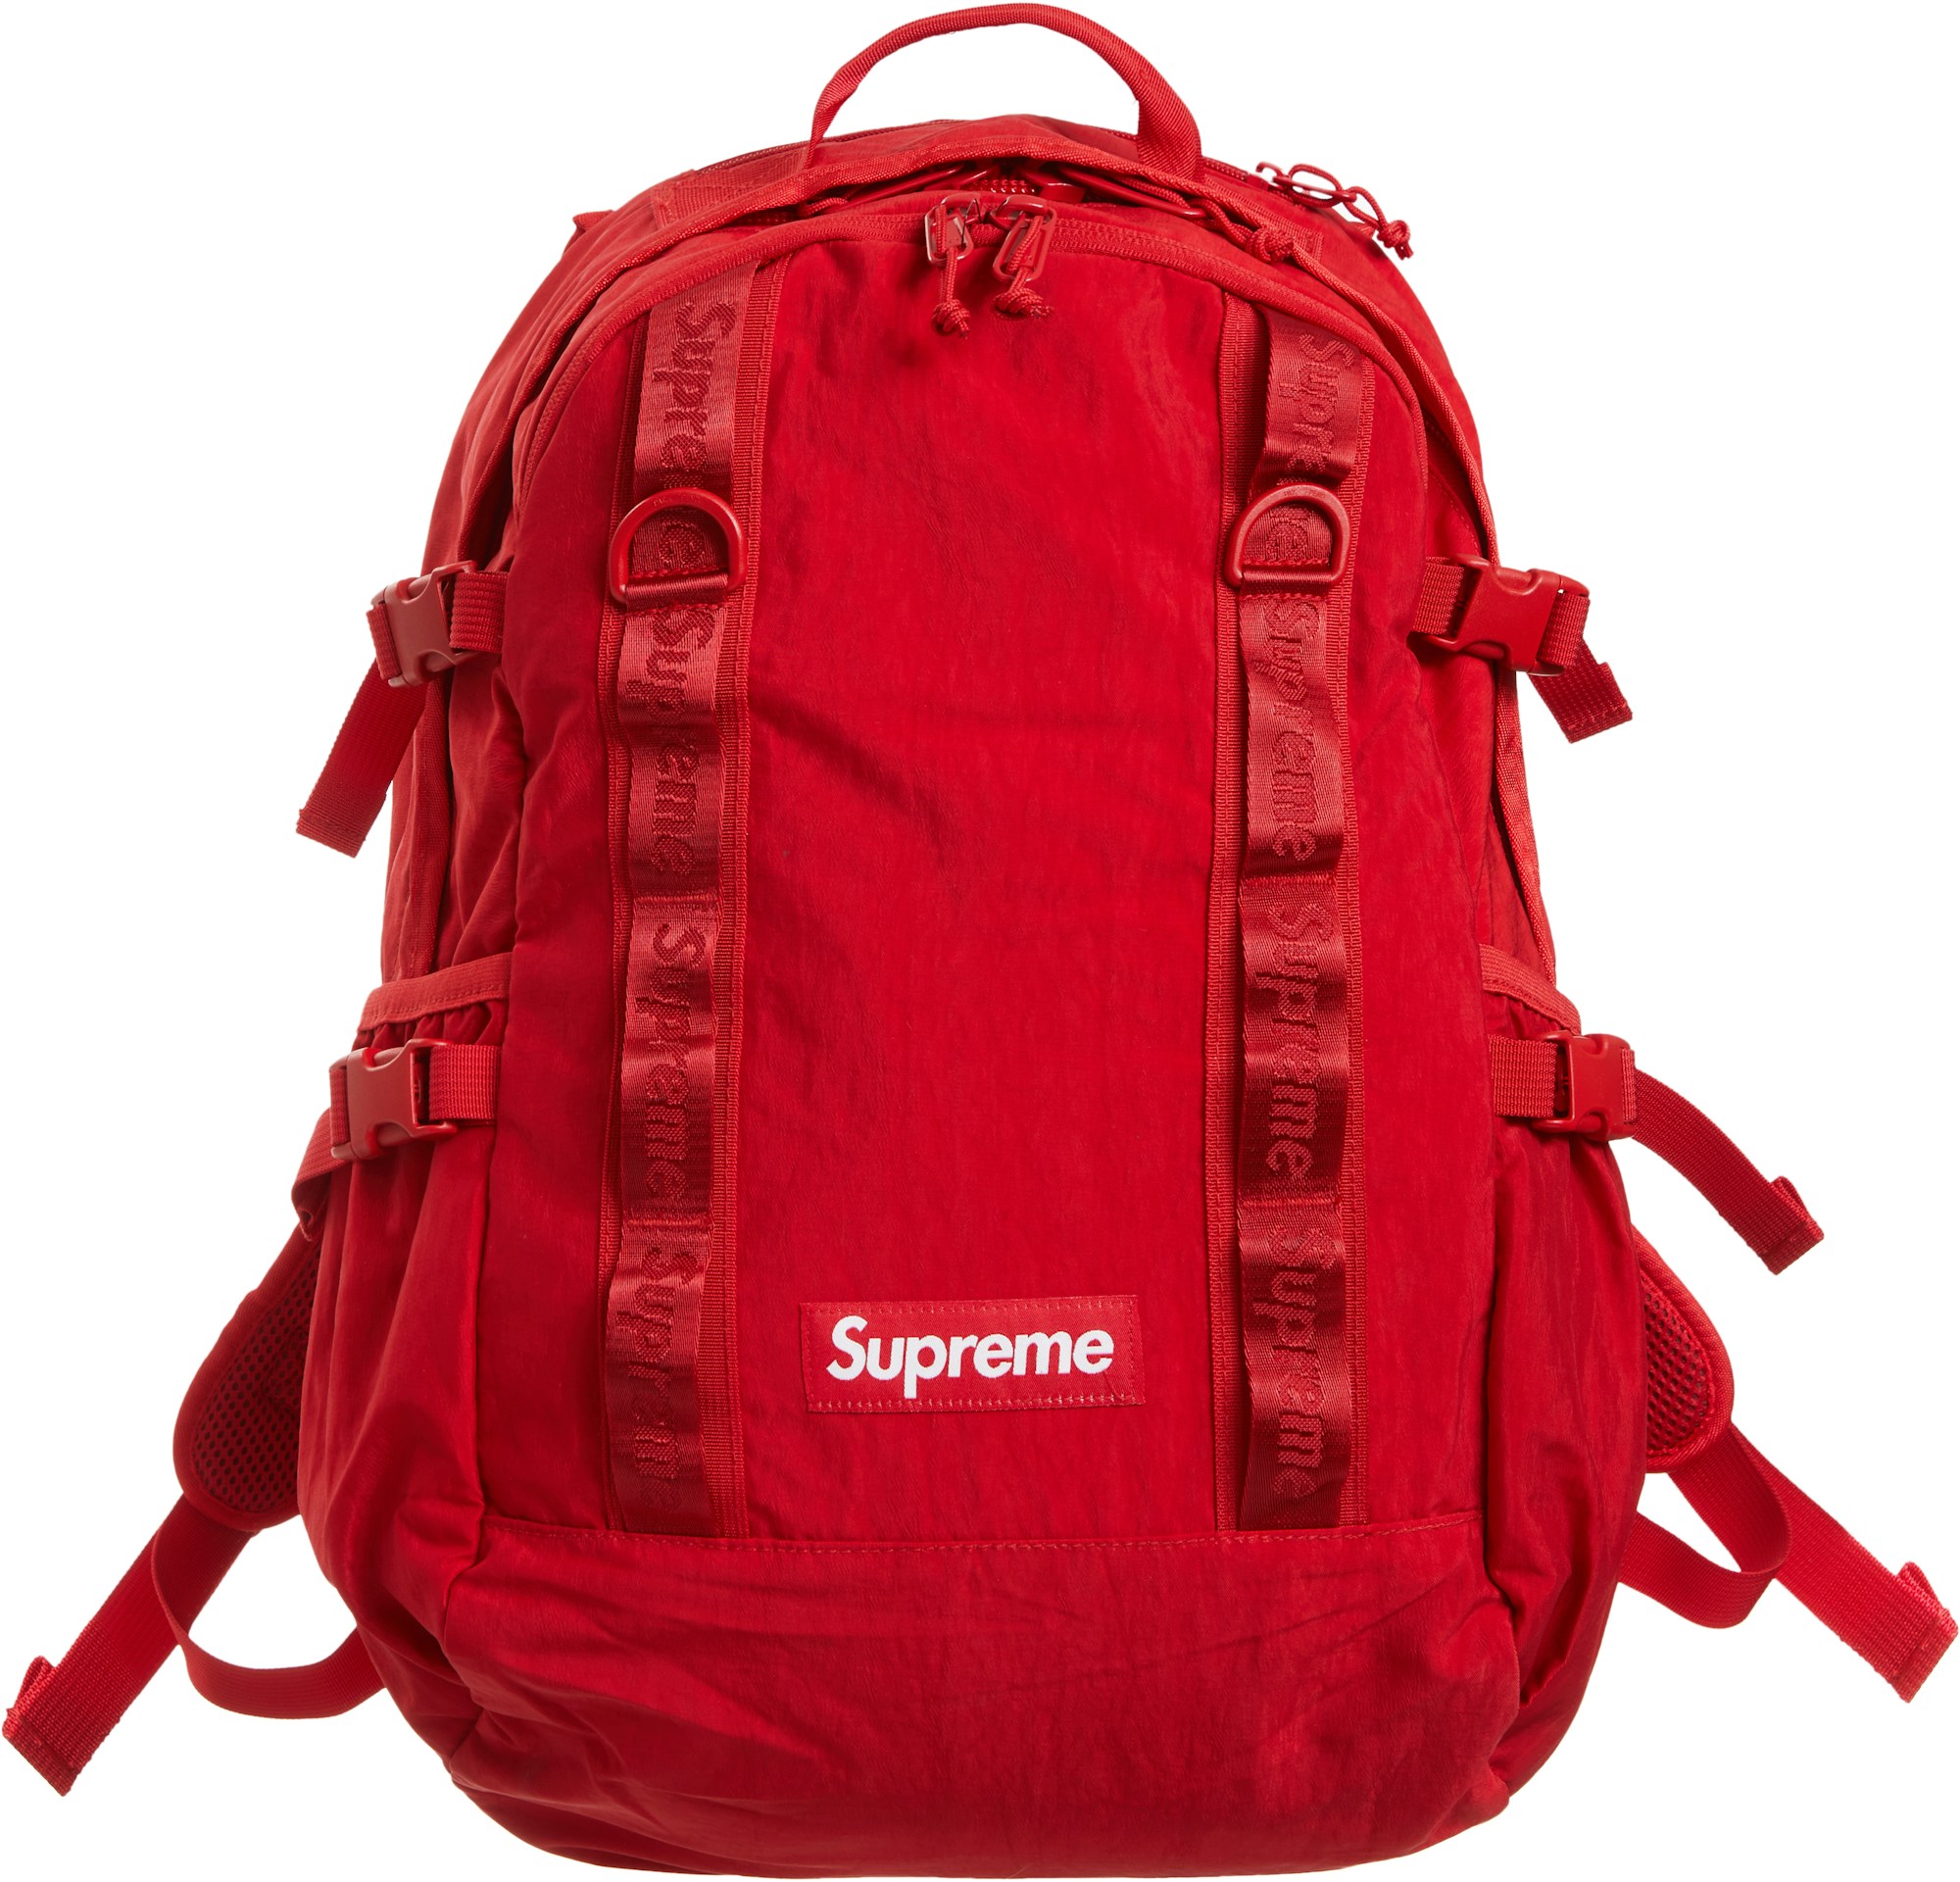 Supreme Backpack (FW20) Dark Red - FW20